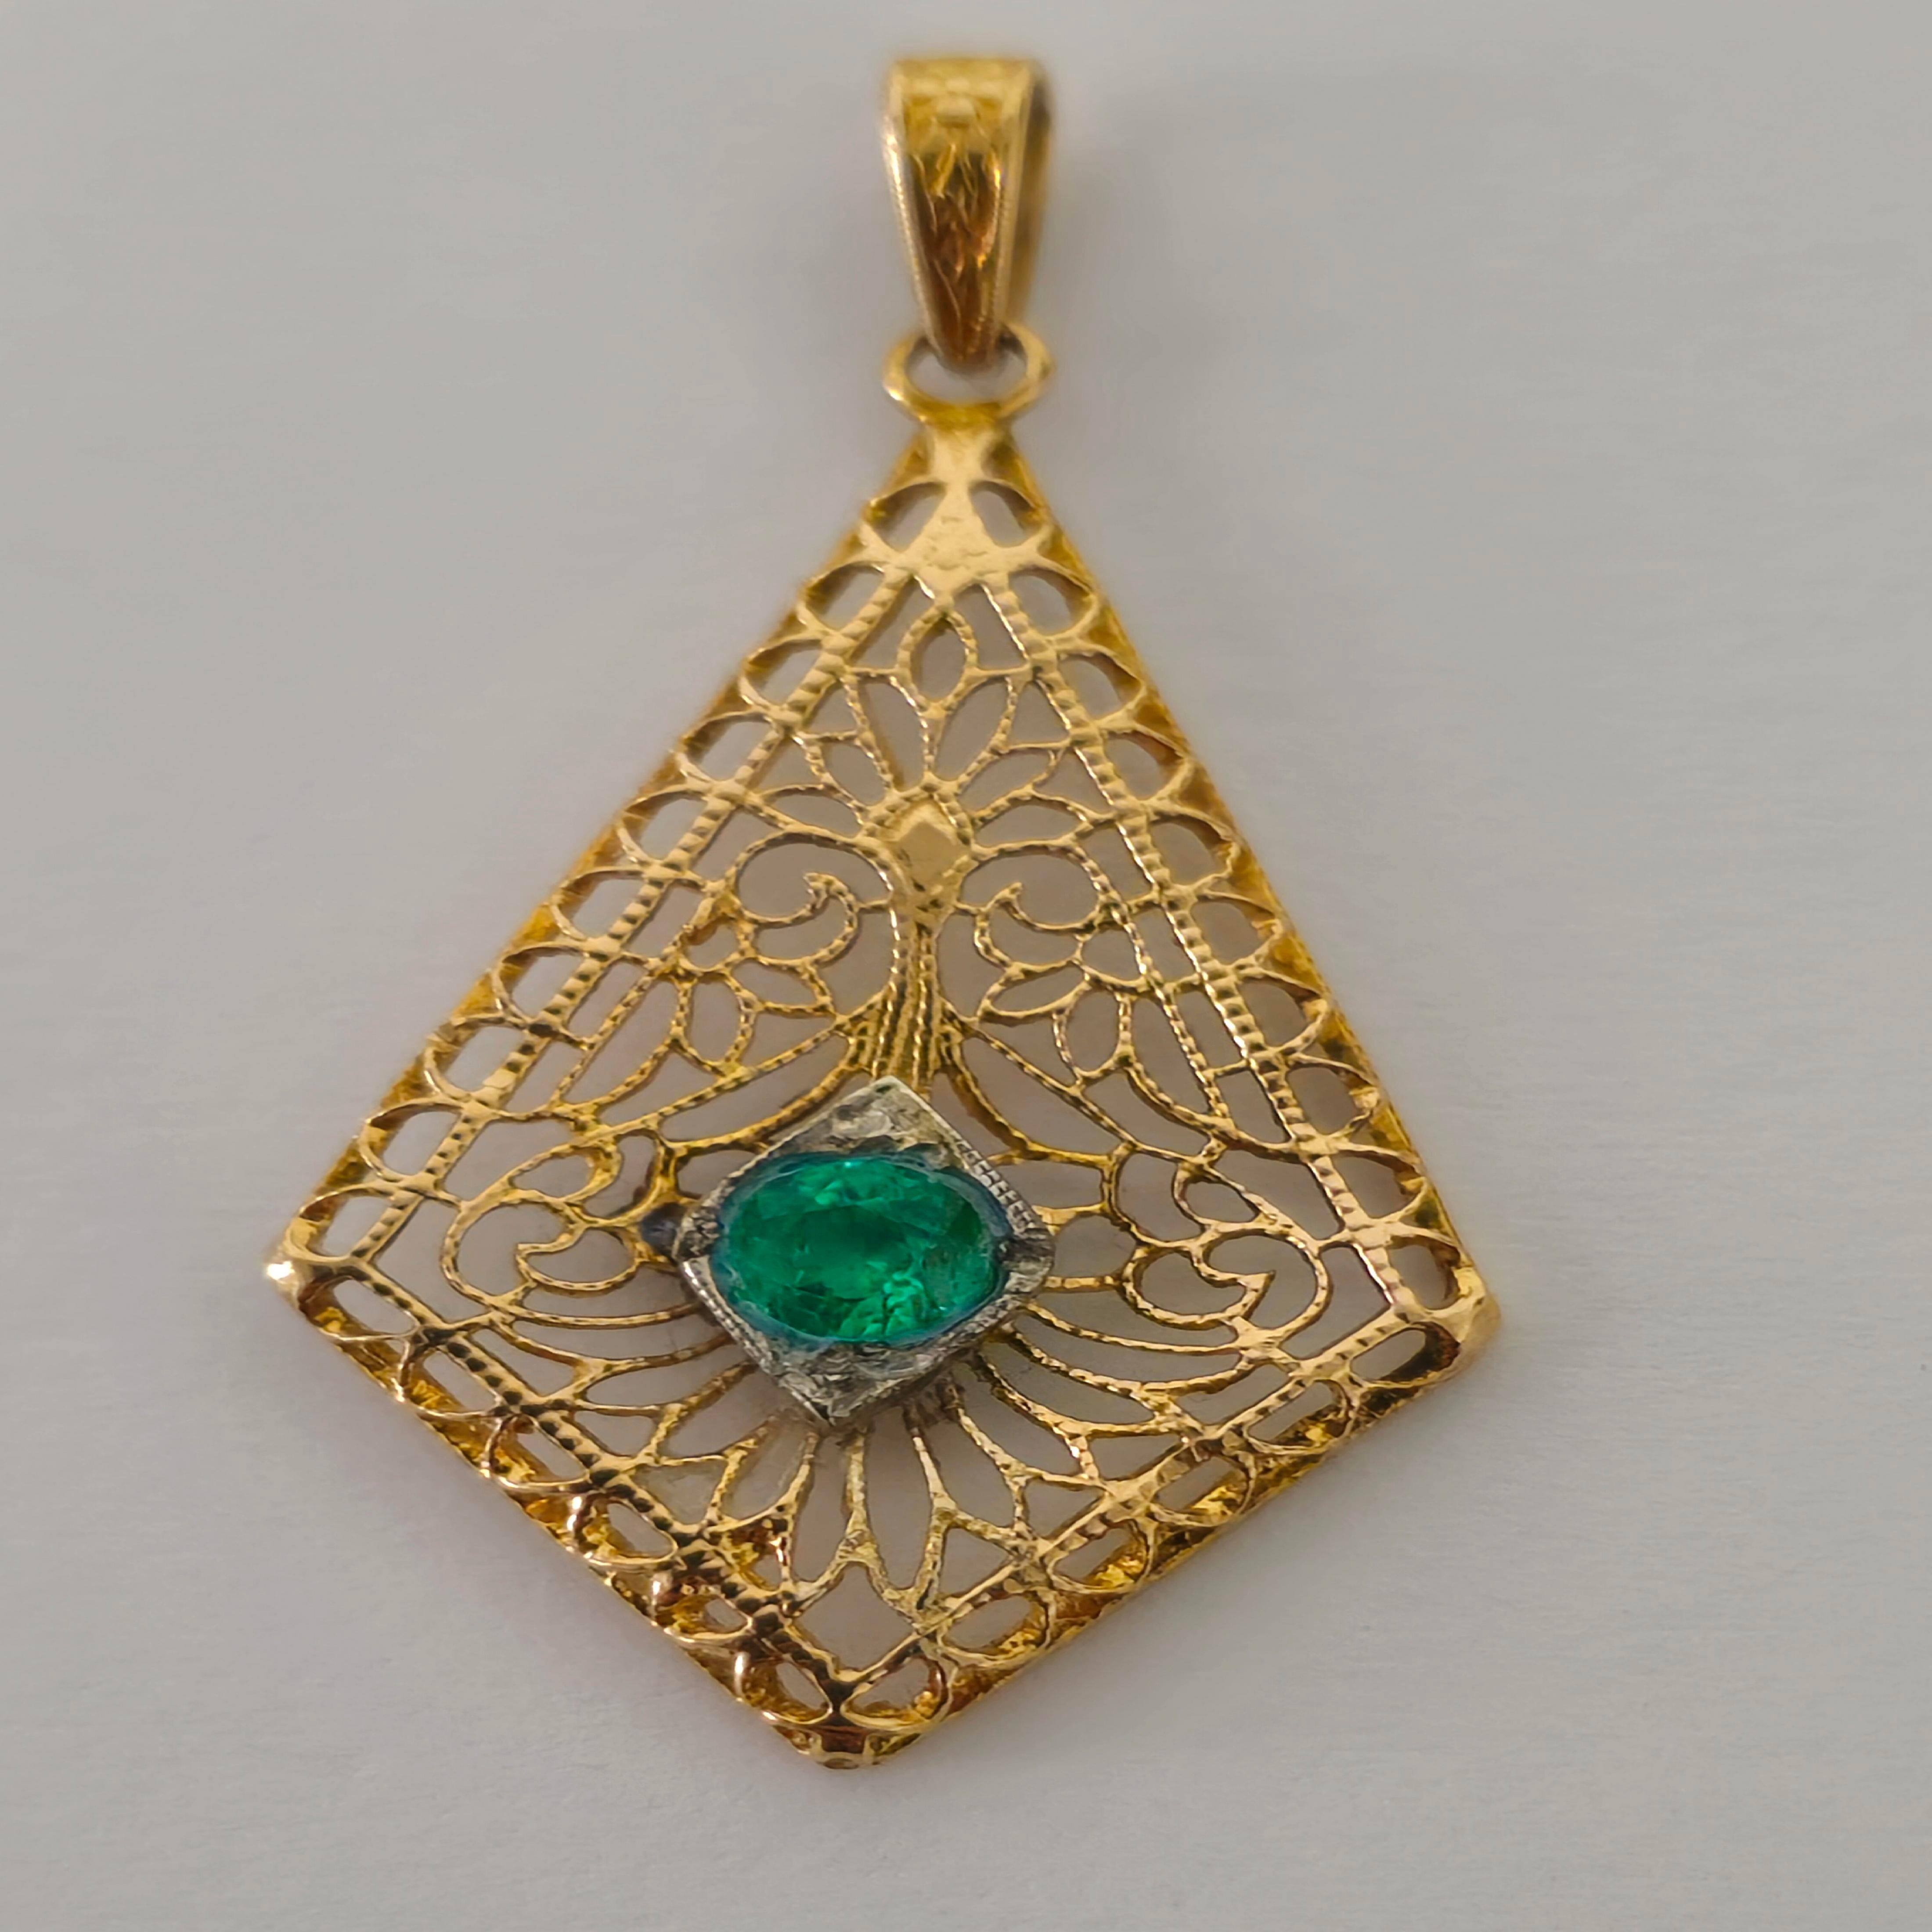 Discover timeless elegance with our Victorian Fine Jewelry Emerald Pendant, crafted from radiant 14k yellow gold. Adorned with a stunning 0.32 carat round-shaped emerald, this pendant exudes natural beauty and sophistication. Perfect for her, it's a